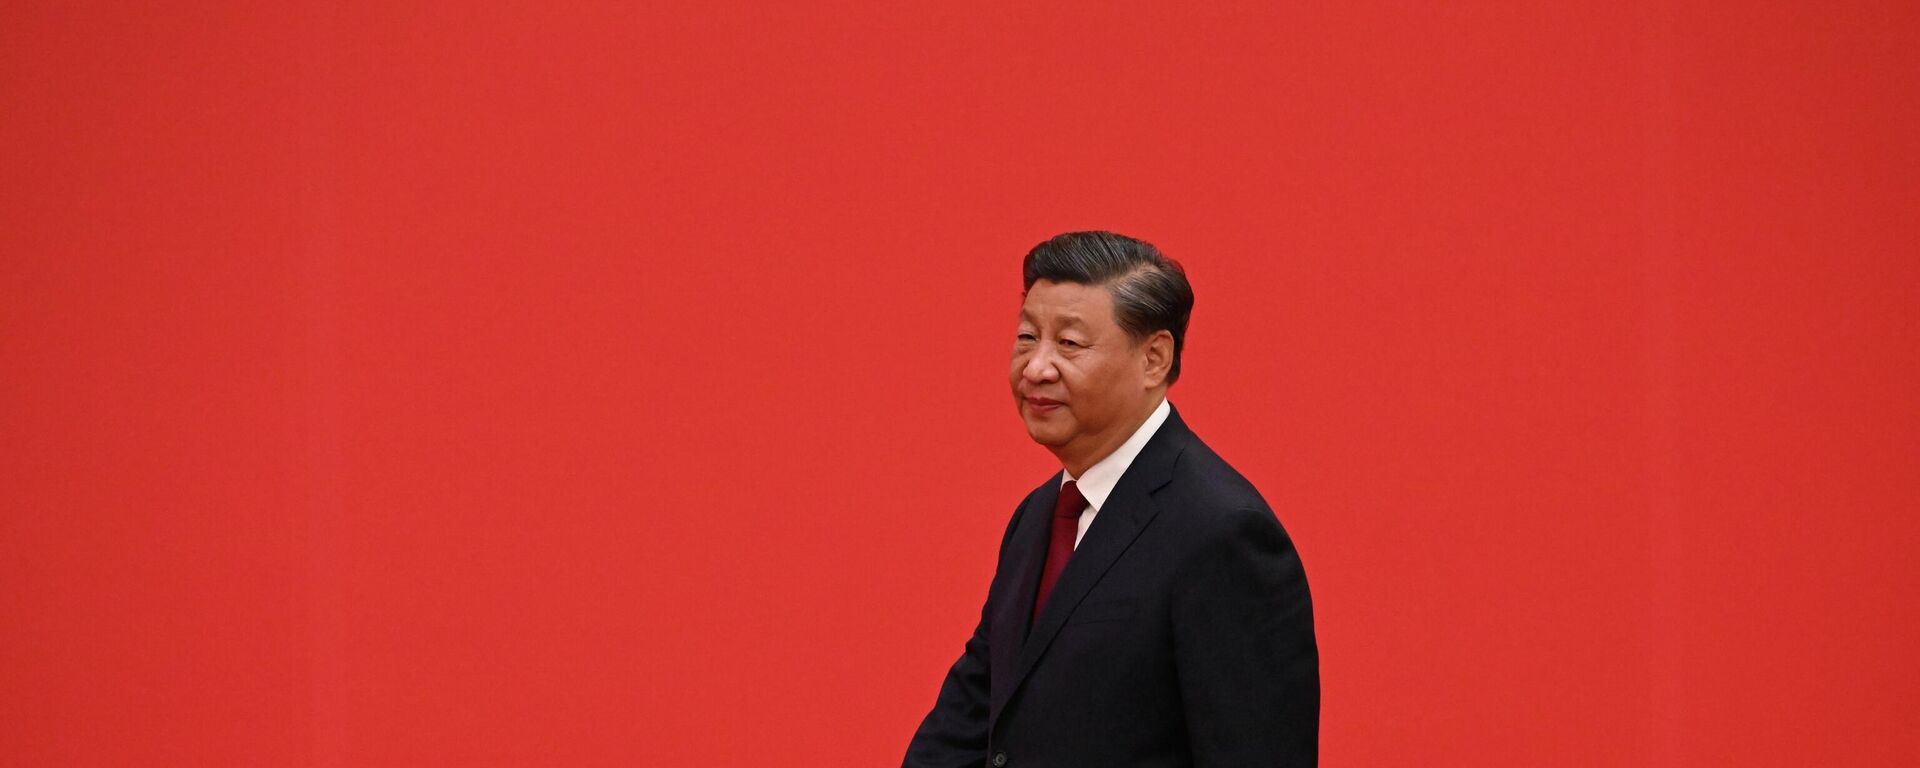 China's President Xi Jinping walks ahead of members of the Chinese Communist Party's new Politburo Standing Committee, the nation's top decision-making body, as they meet the media in the Great Hall of the People in Beijing on October 23, 2022.  - Sputnik International, 1920, 23.10.2022